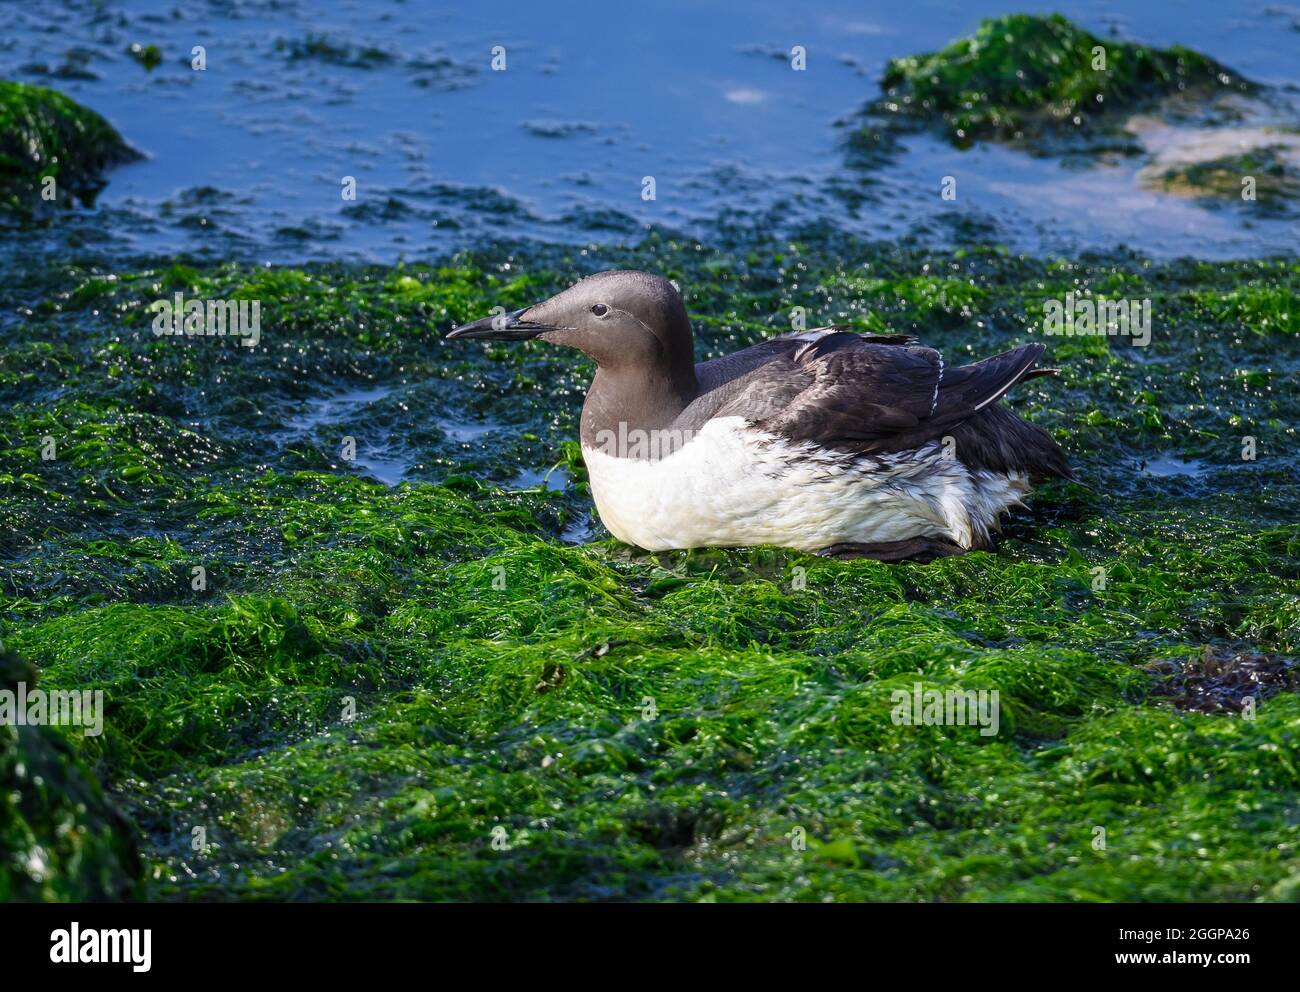 A Common Murre (Uria aalge) stranded in a shallow tidal pool. Florence, Oregon, USA. Stock Photo